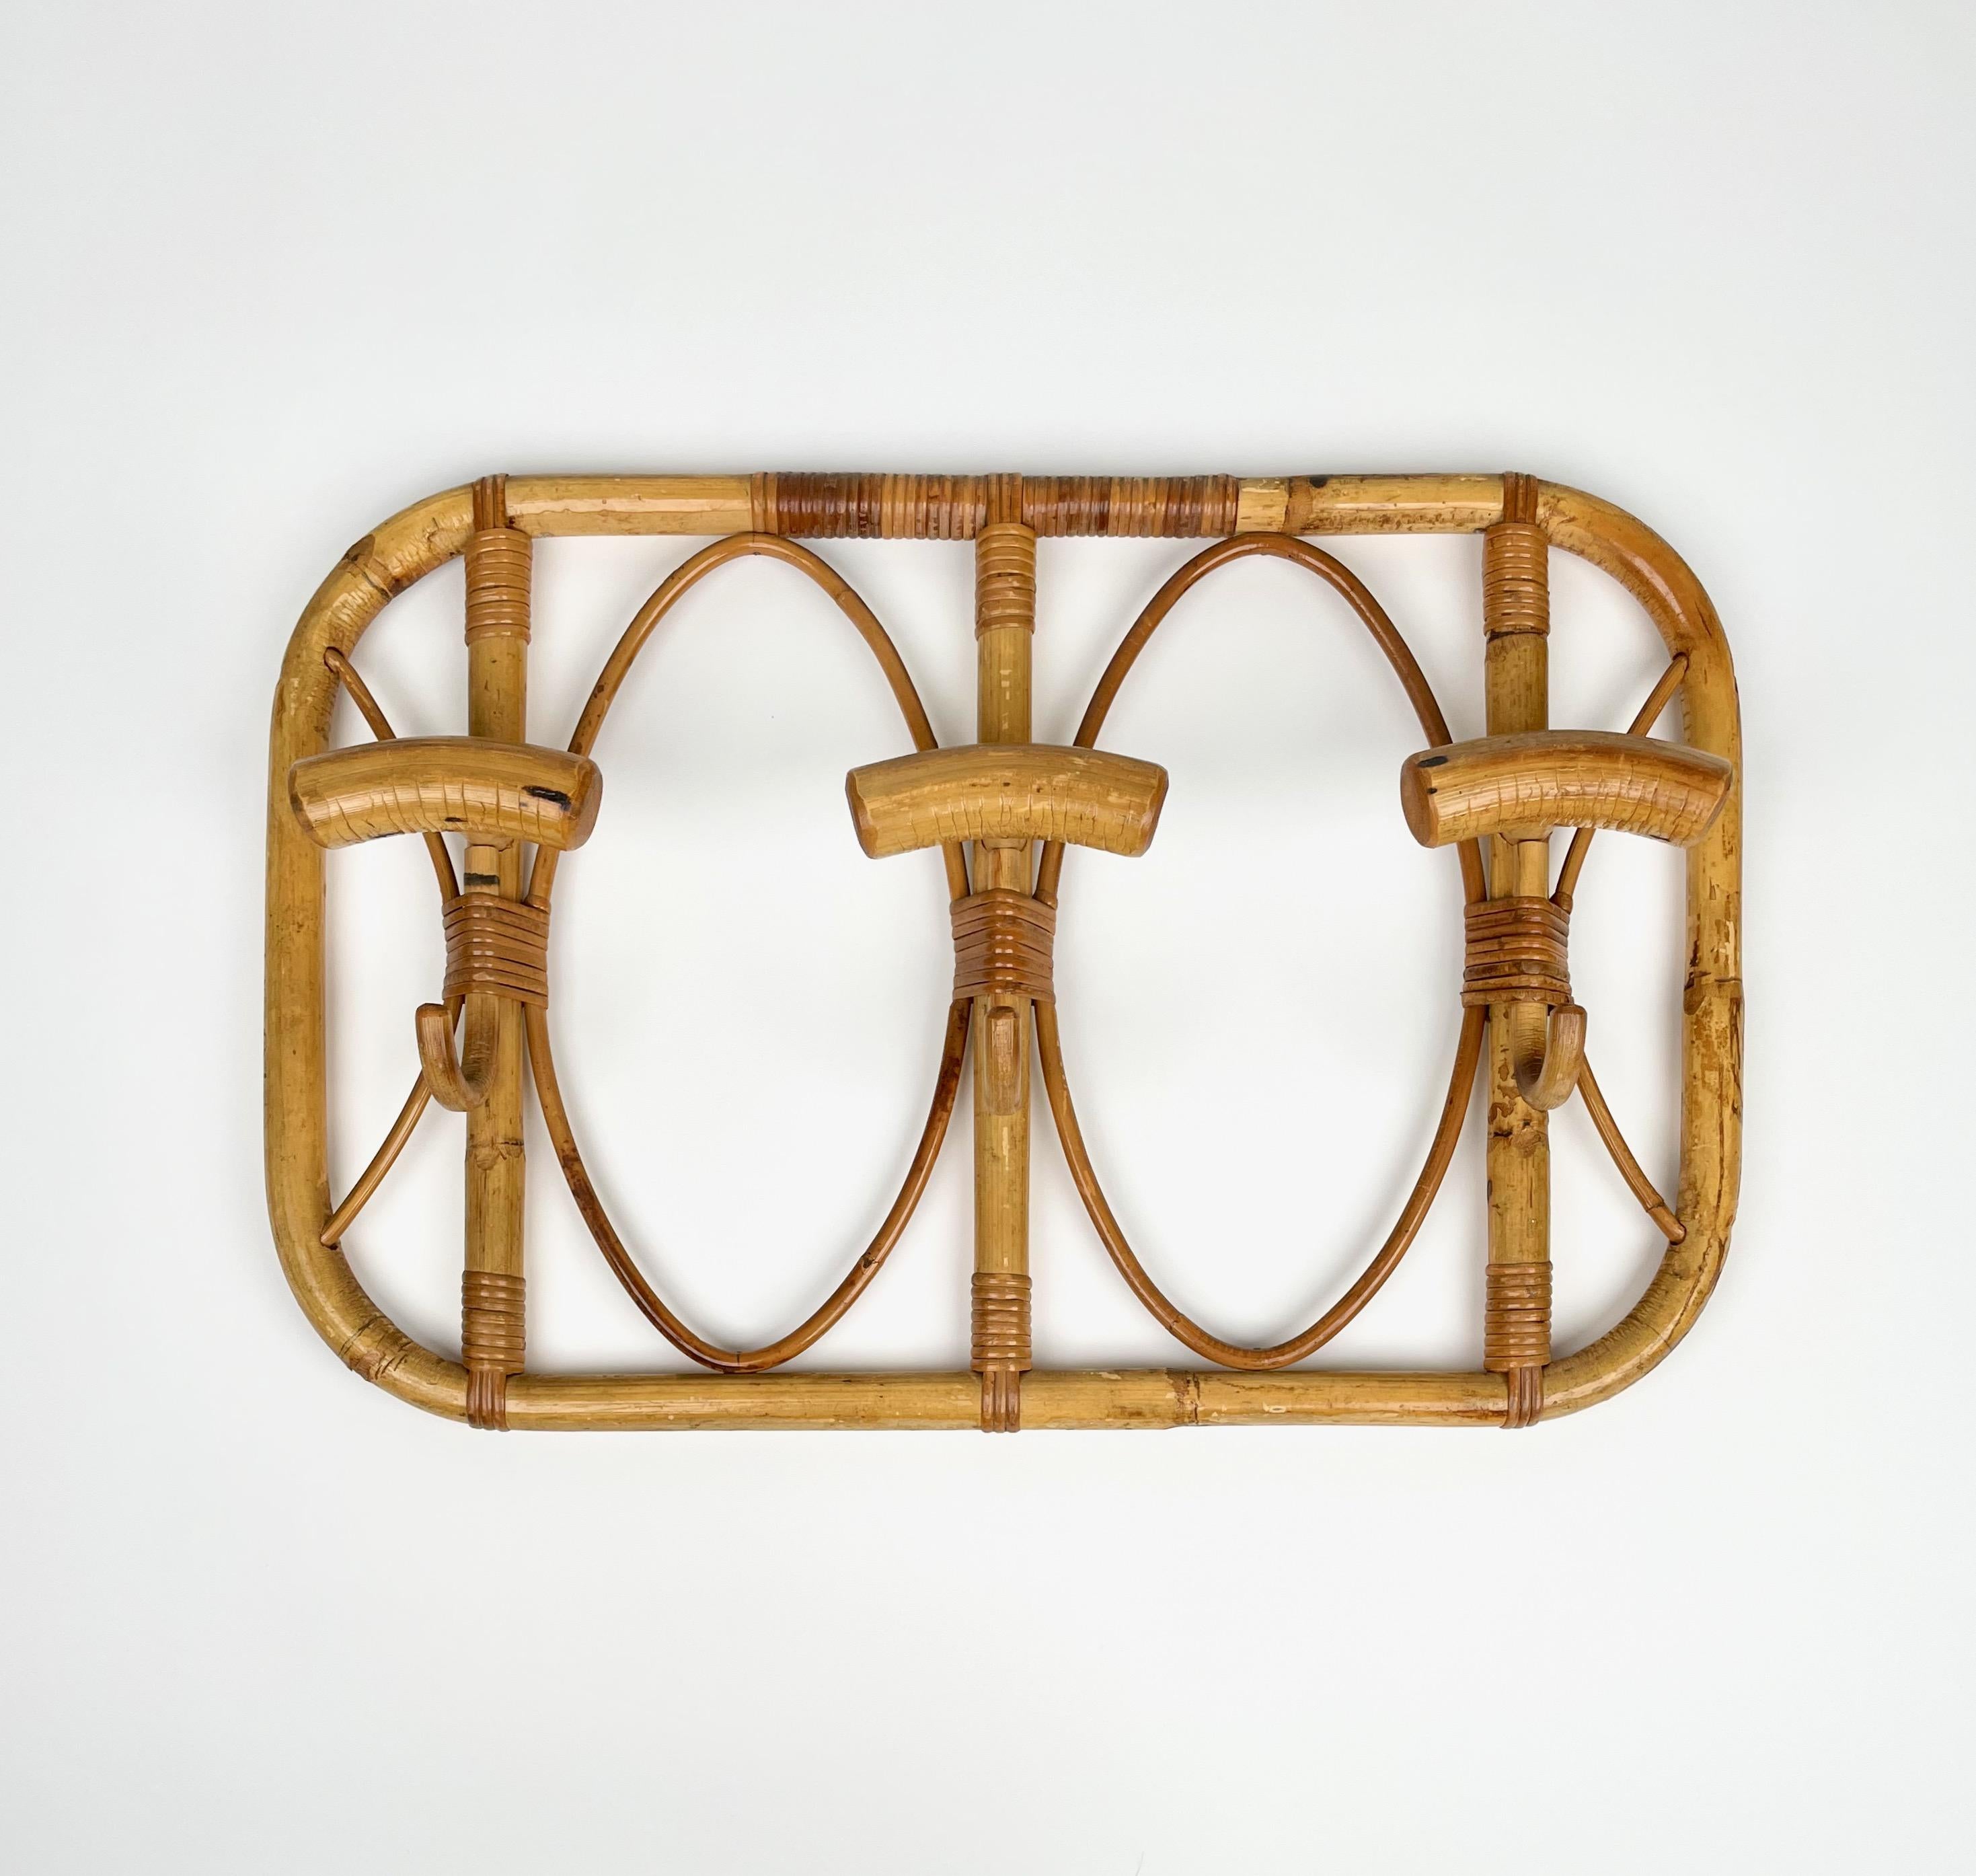 Rectangular coat hanger with rounded corners in bamboo and rattan featuring three hooks. 

Made in Italy in the 1960s.